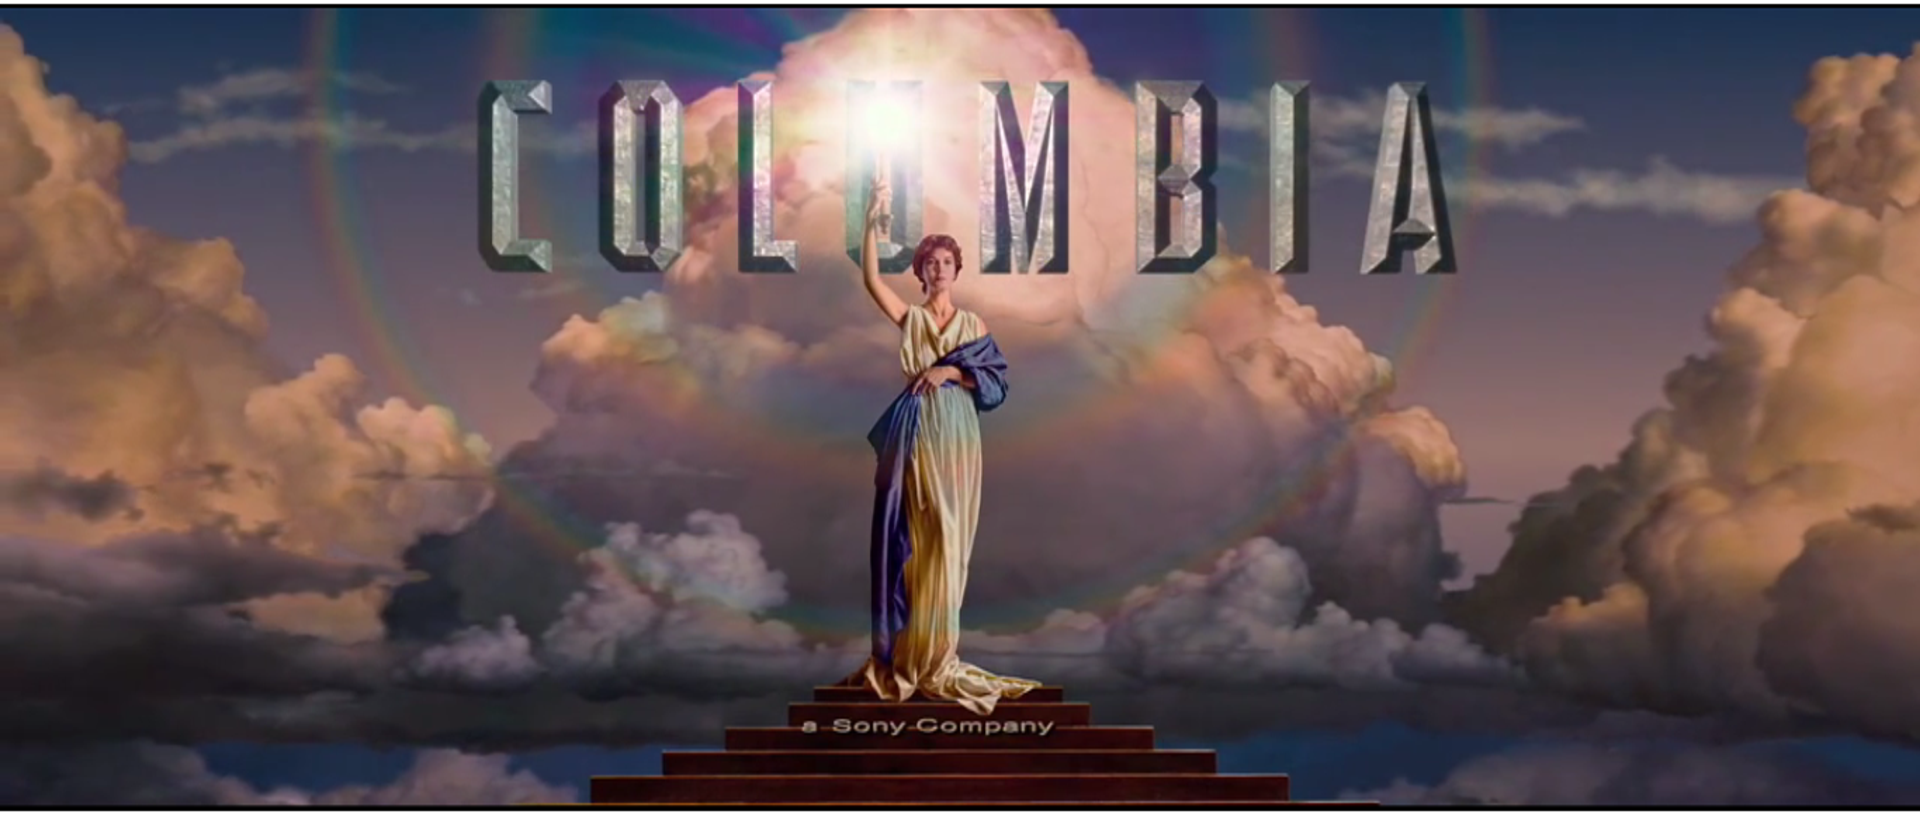 Columbia Pictures | Sony Pictures Entertaiment Wiki | FANDOM powered by